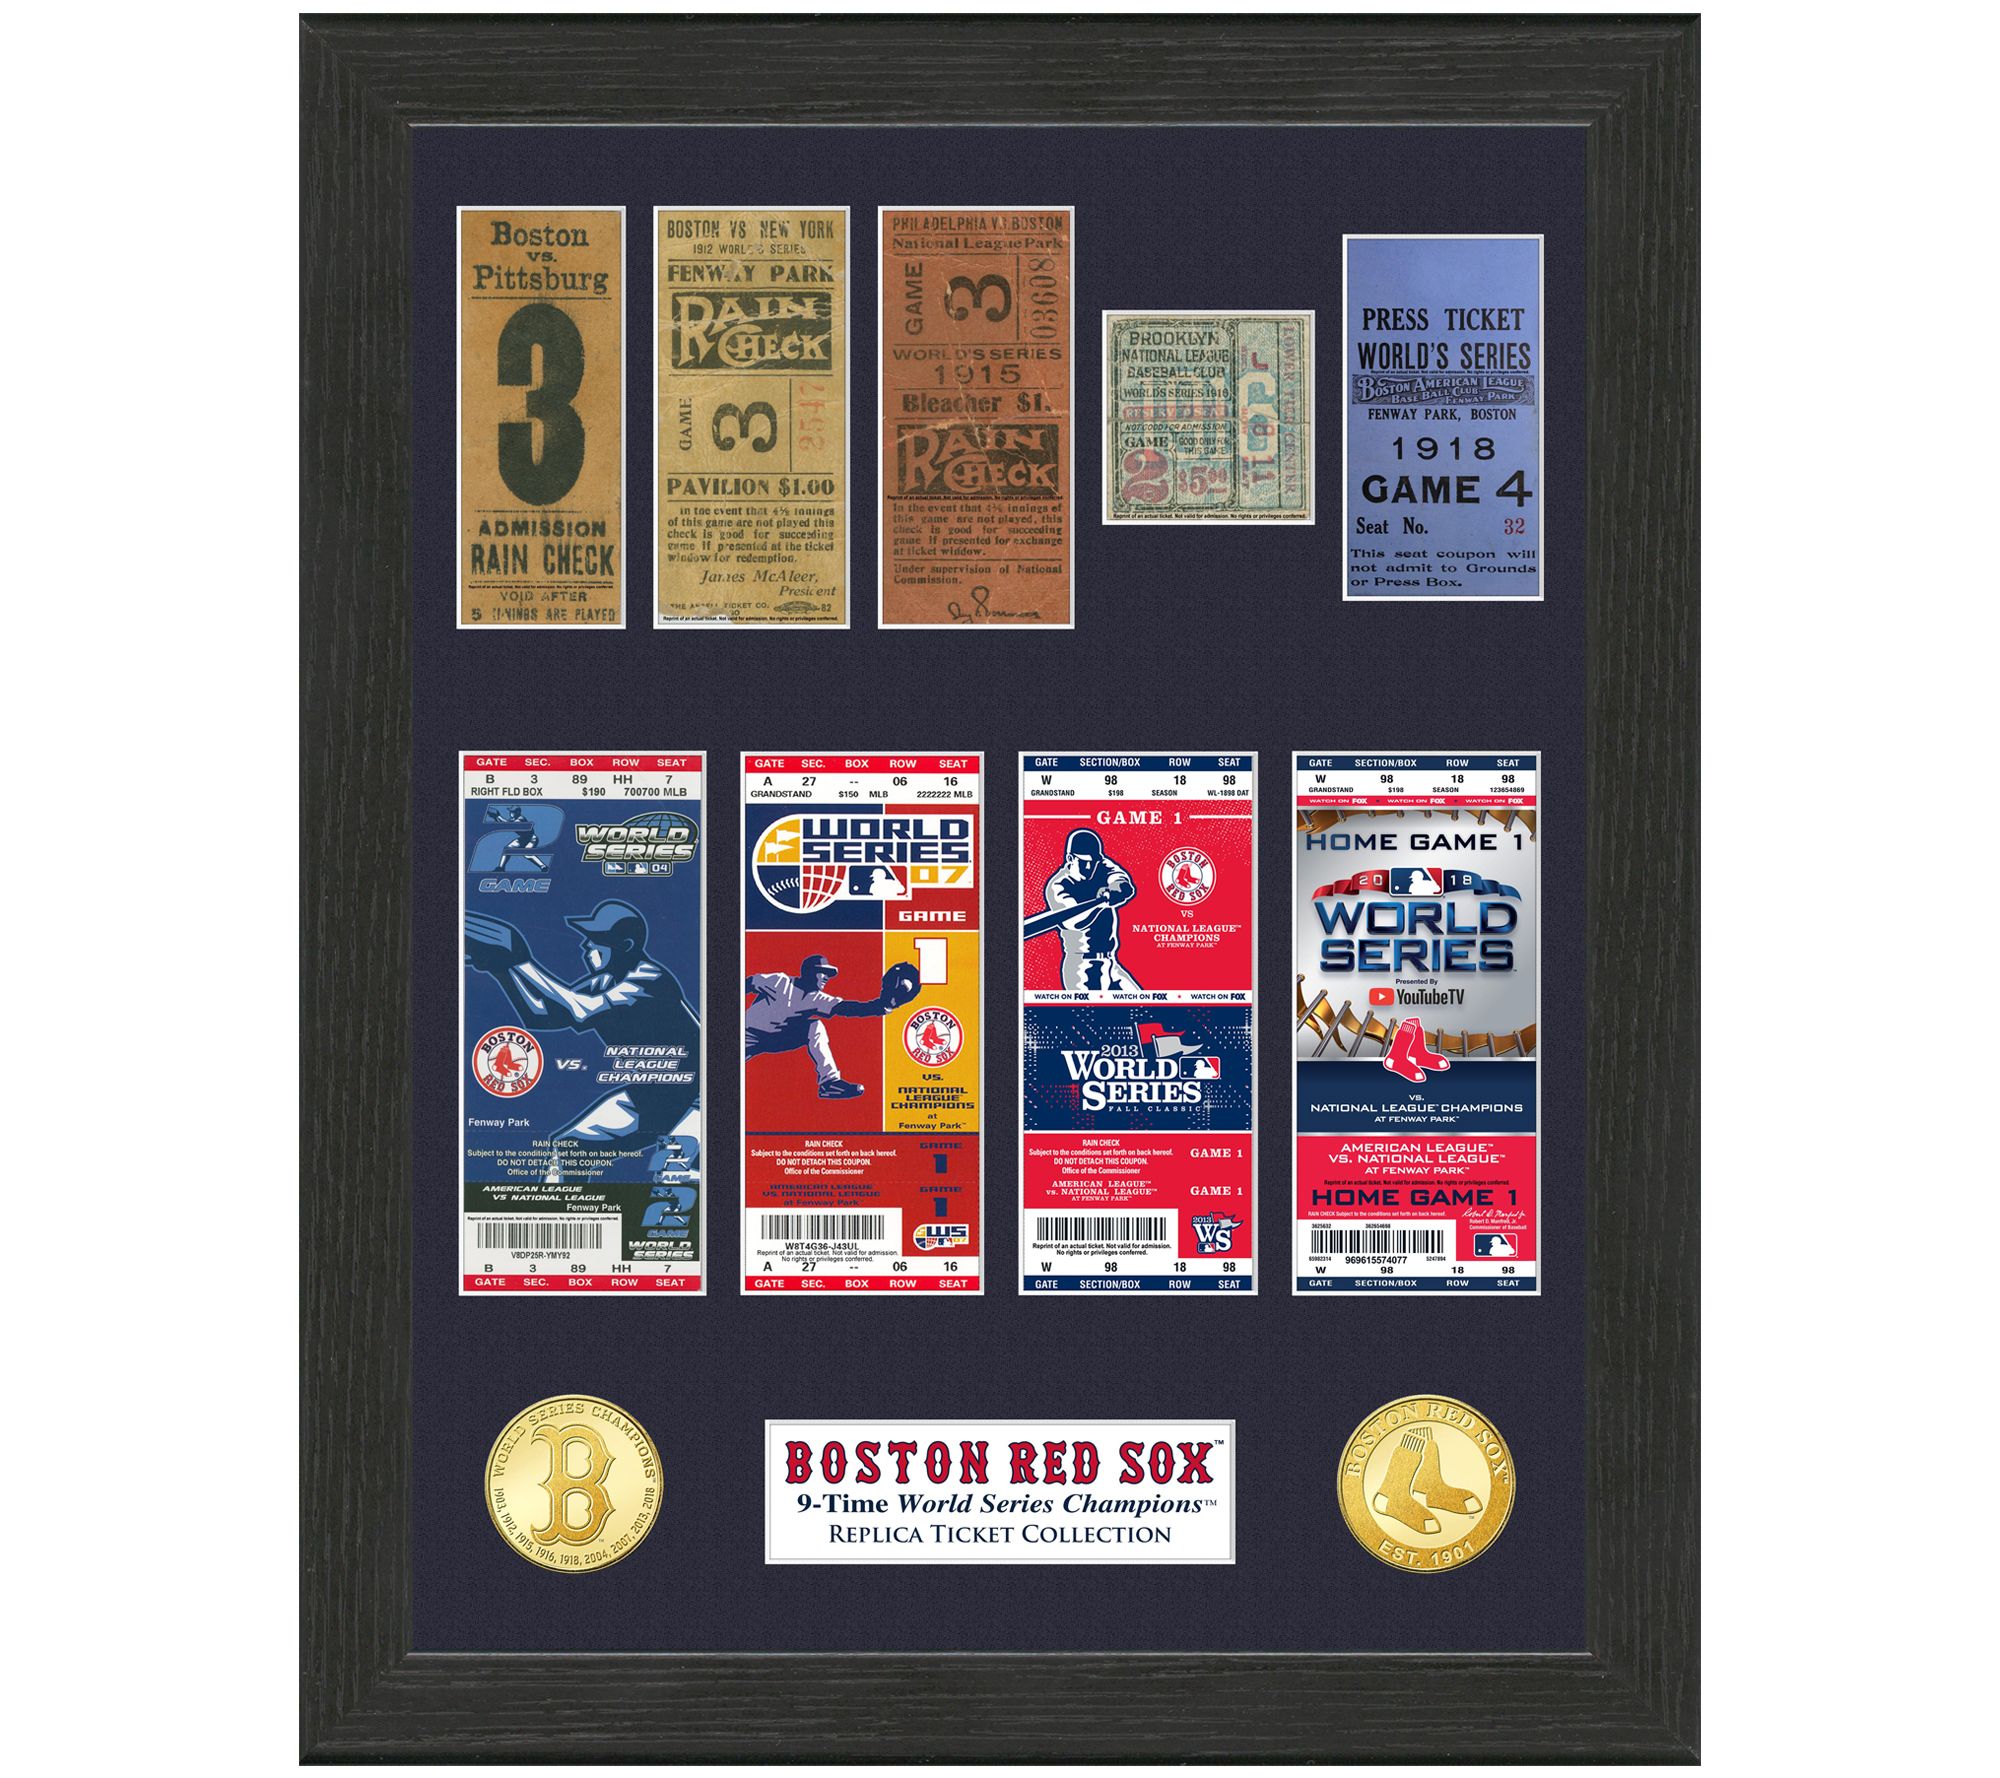 Boston Red Sox 9-Time World Series Champions Gold Coin & Ticket Collection